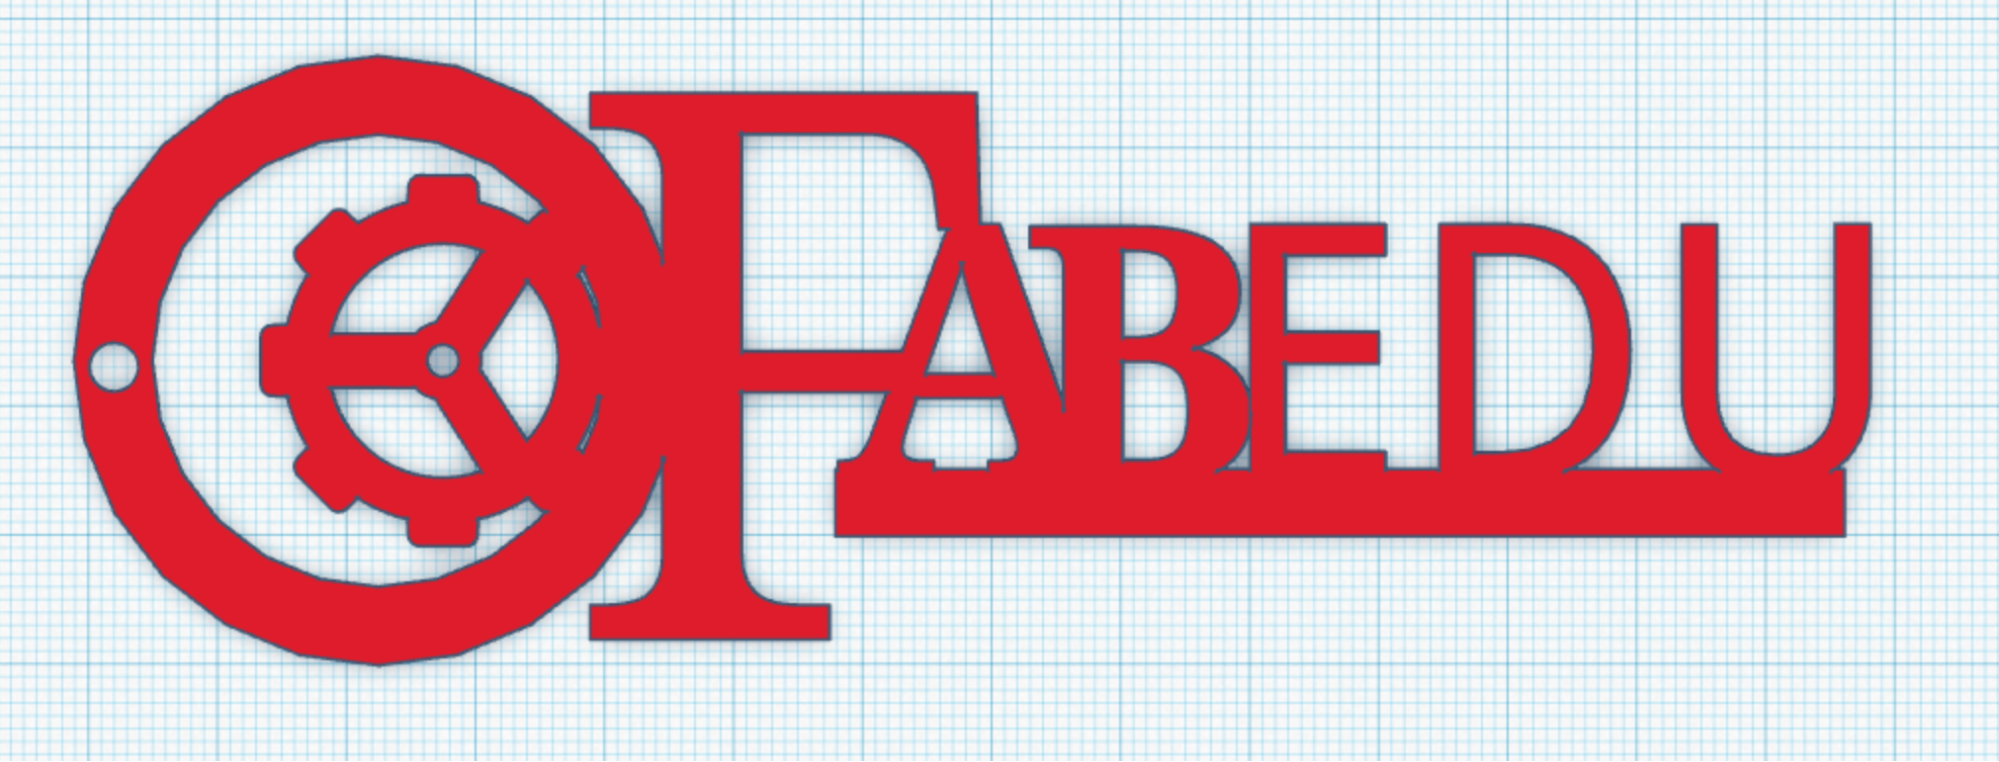 Design Your Personal Logo With Tinkercad By Vectorealism Thingiverse